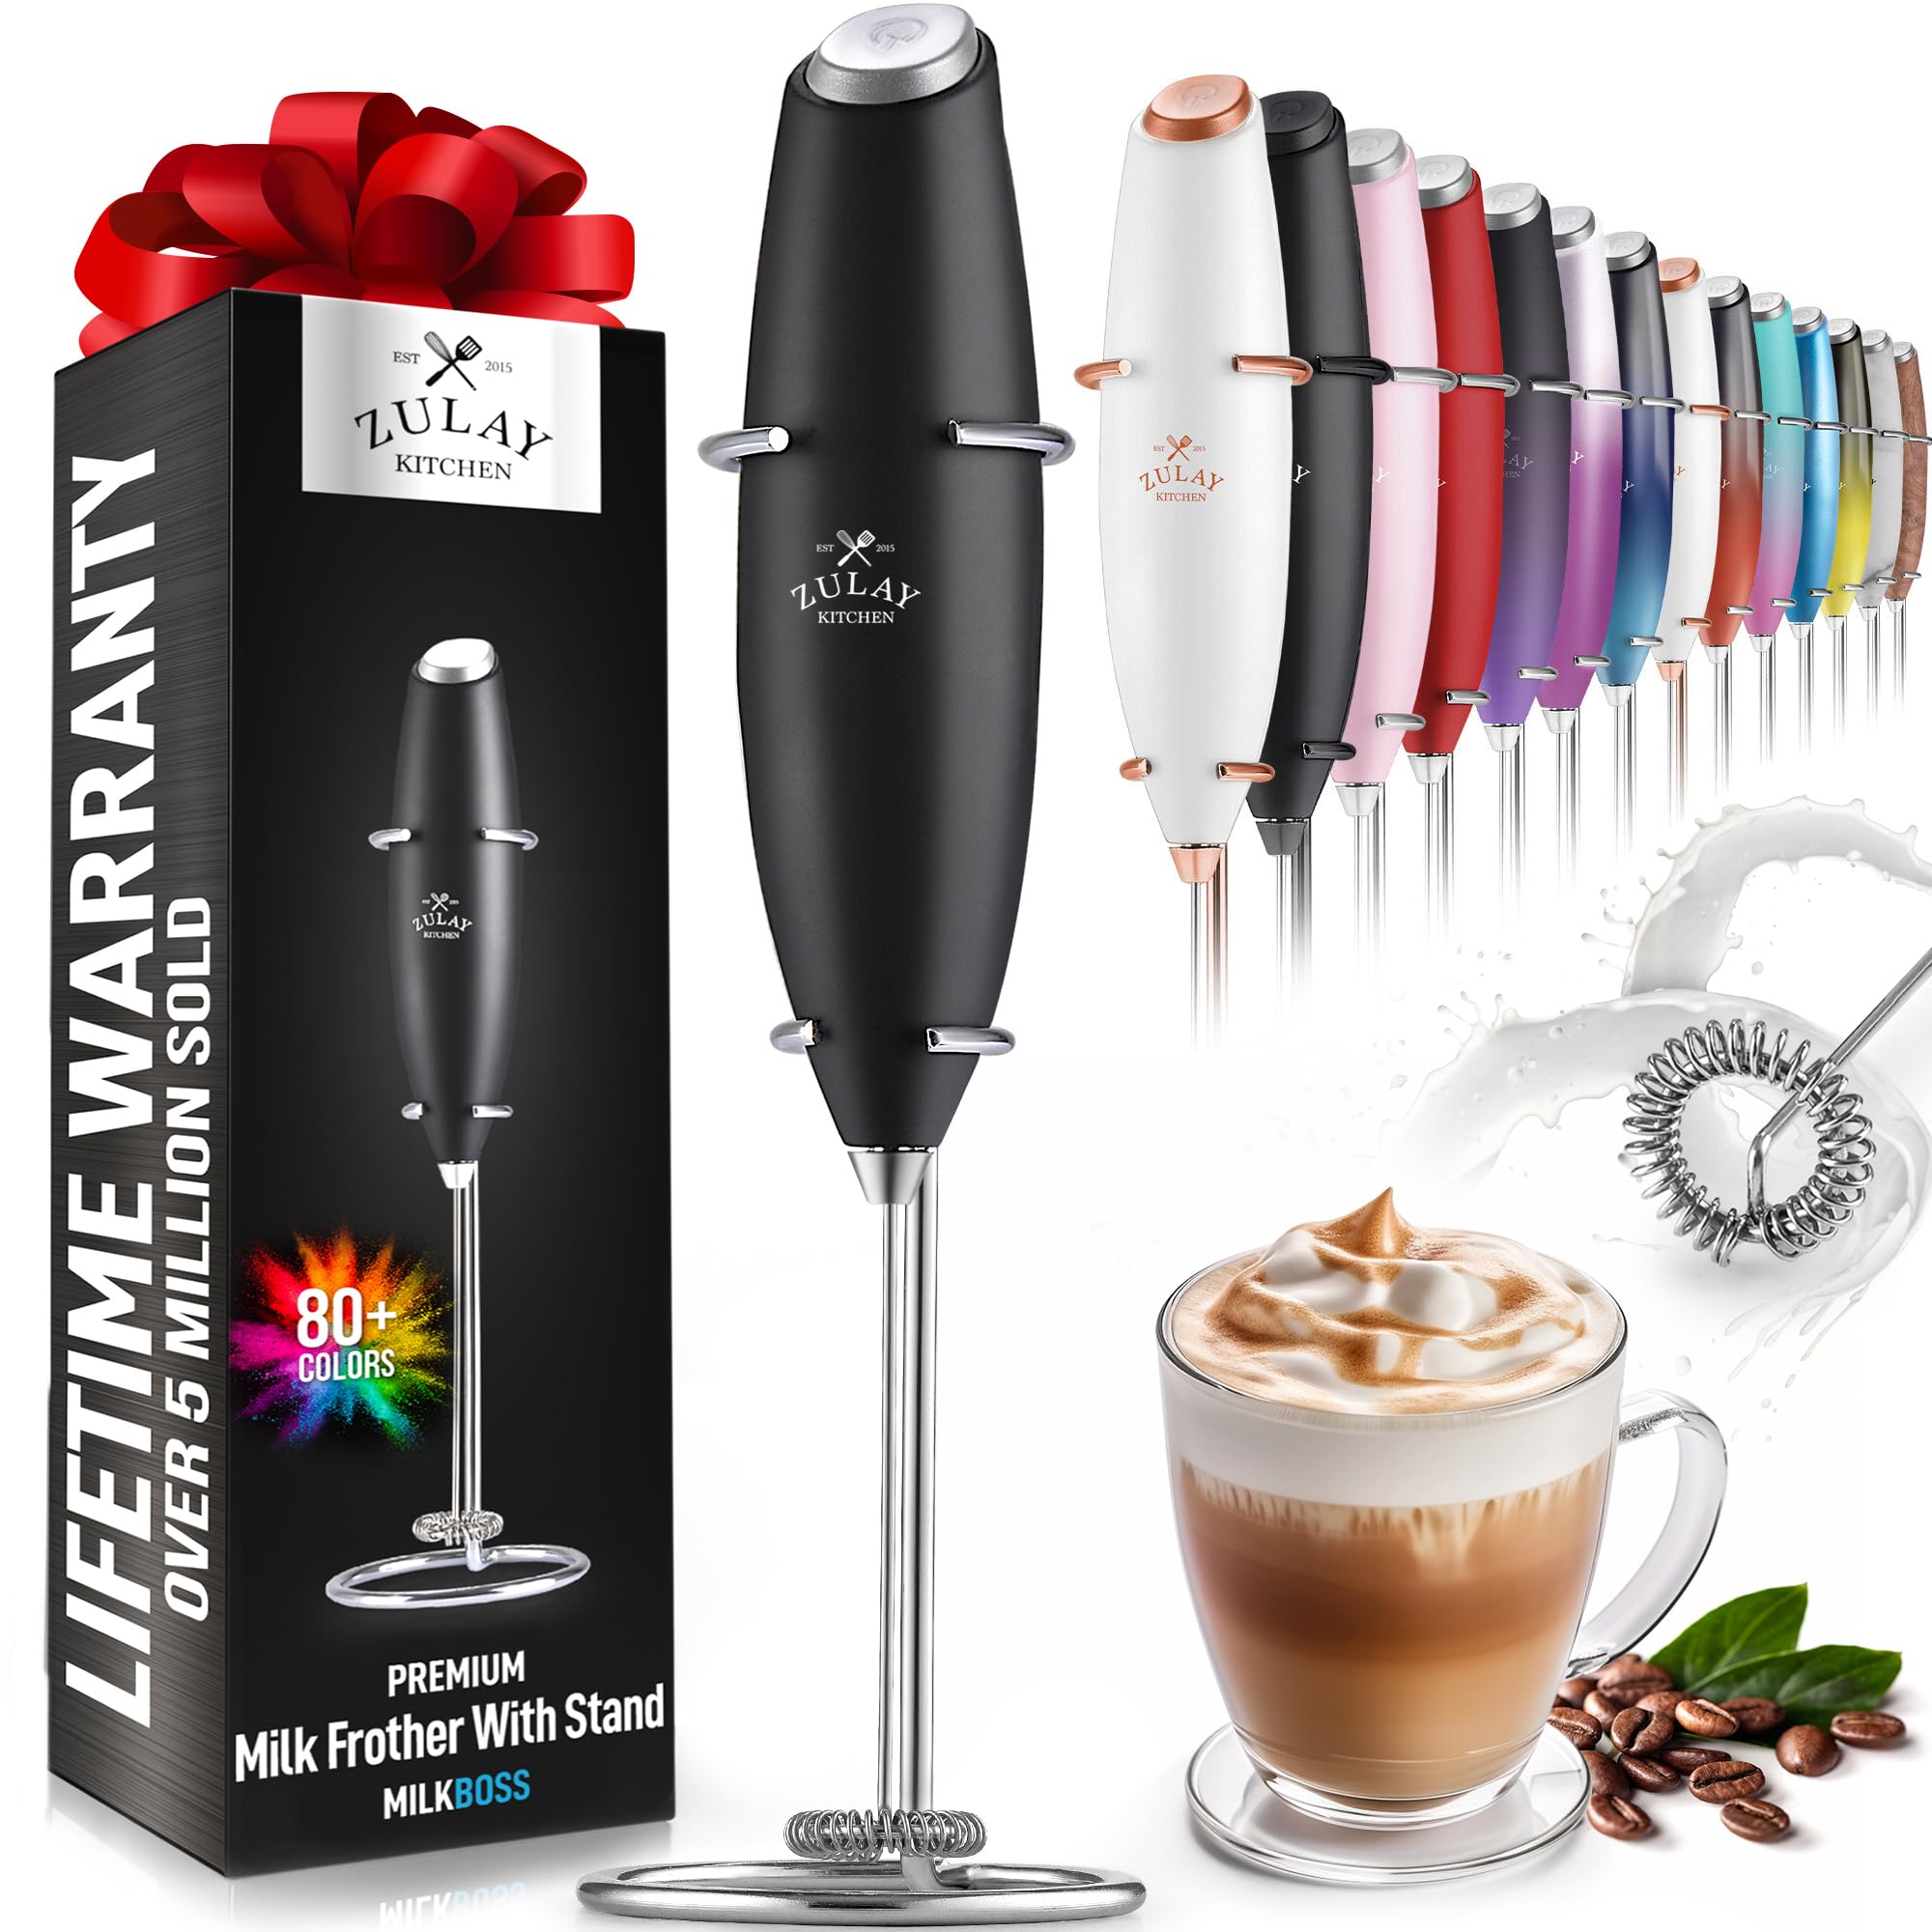 Zulay Kitchen Powerful Milk Frother Handheld Foam Maker for Lattes - Whisk Drink Mixer for Coffee, Mini Foamer for Cappuccino, Frappe, Matcha, Hot Chocolate by Milk Boss (Black)